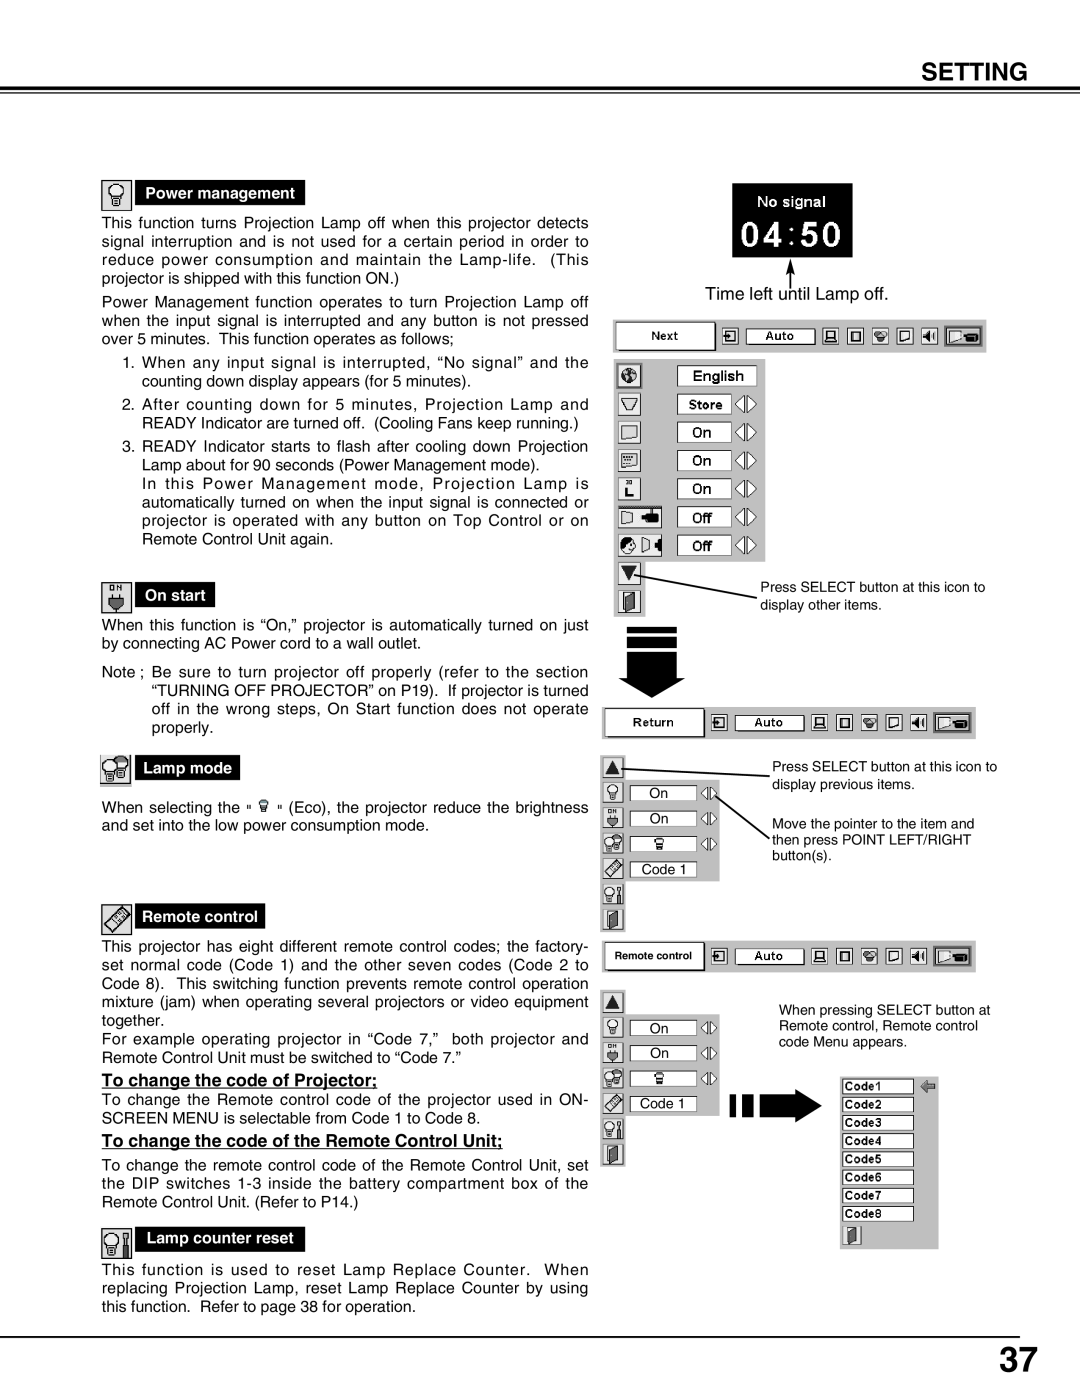 Christie Digital Systems 38-VIV207-01 user manual Setting, Time left until Lamp off, To change the code of Projector 